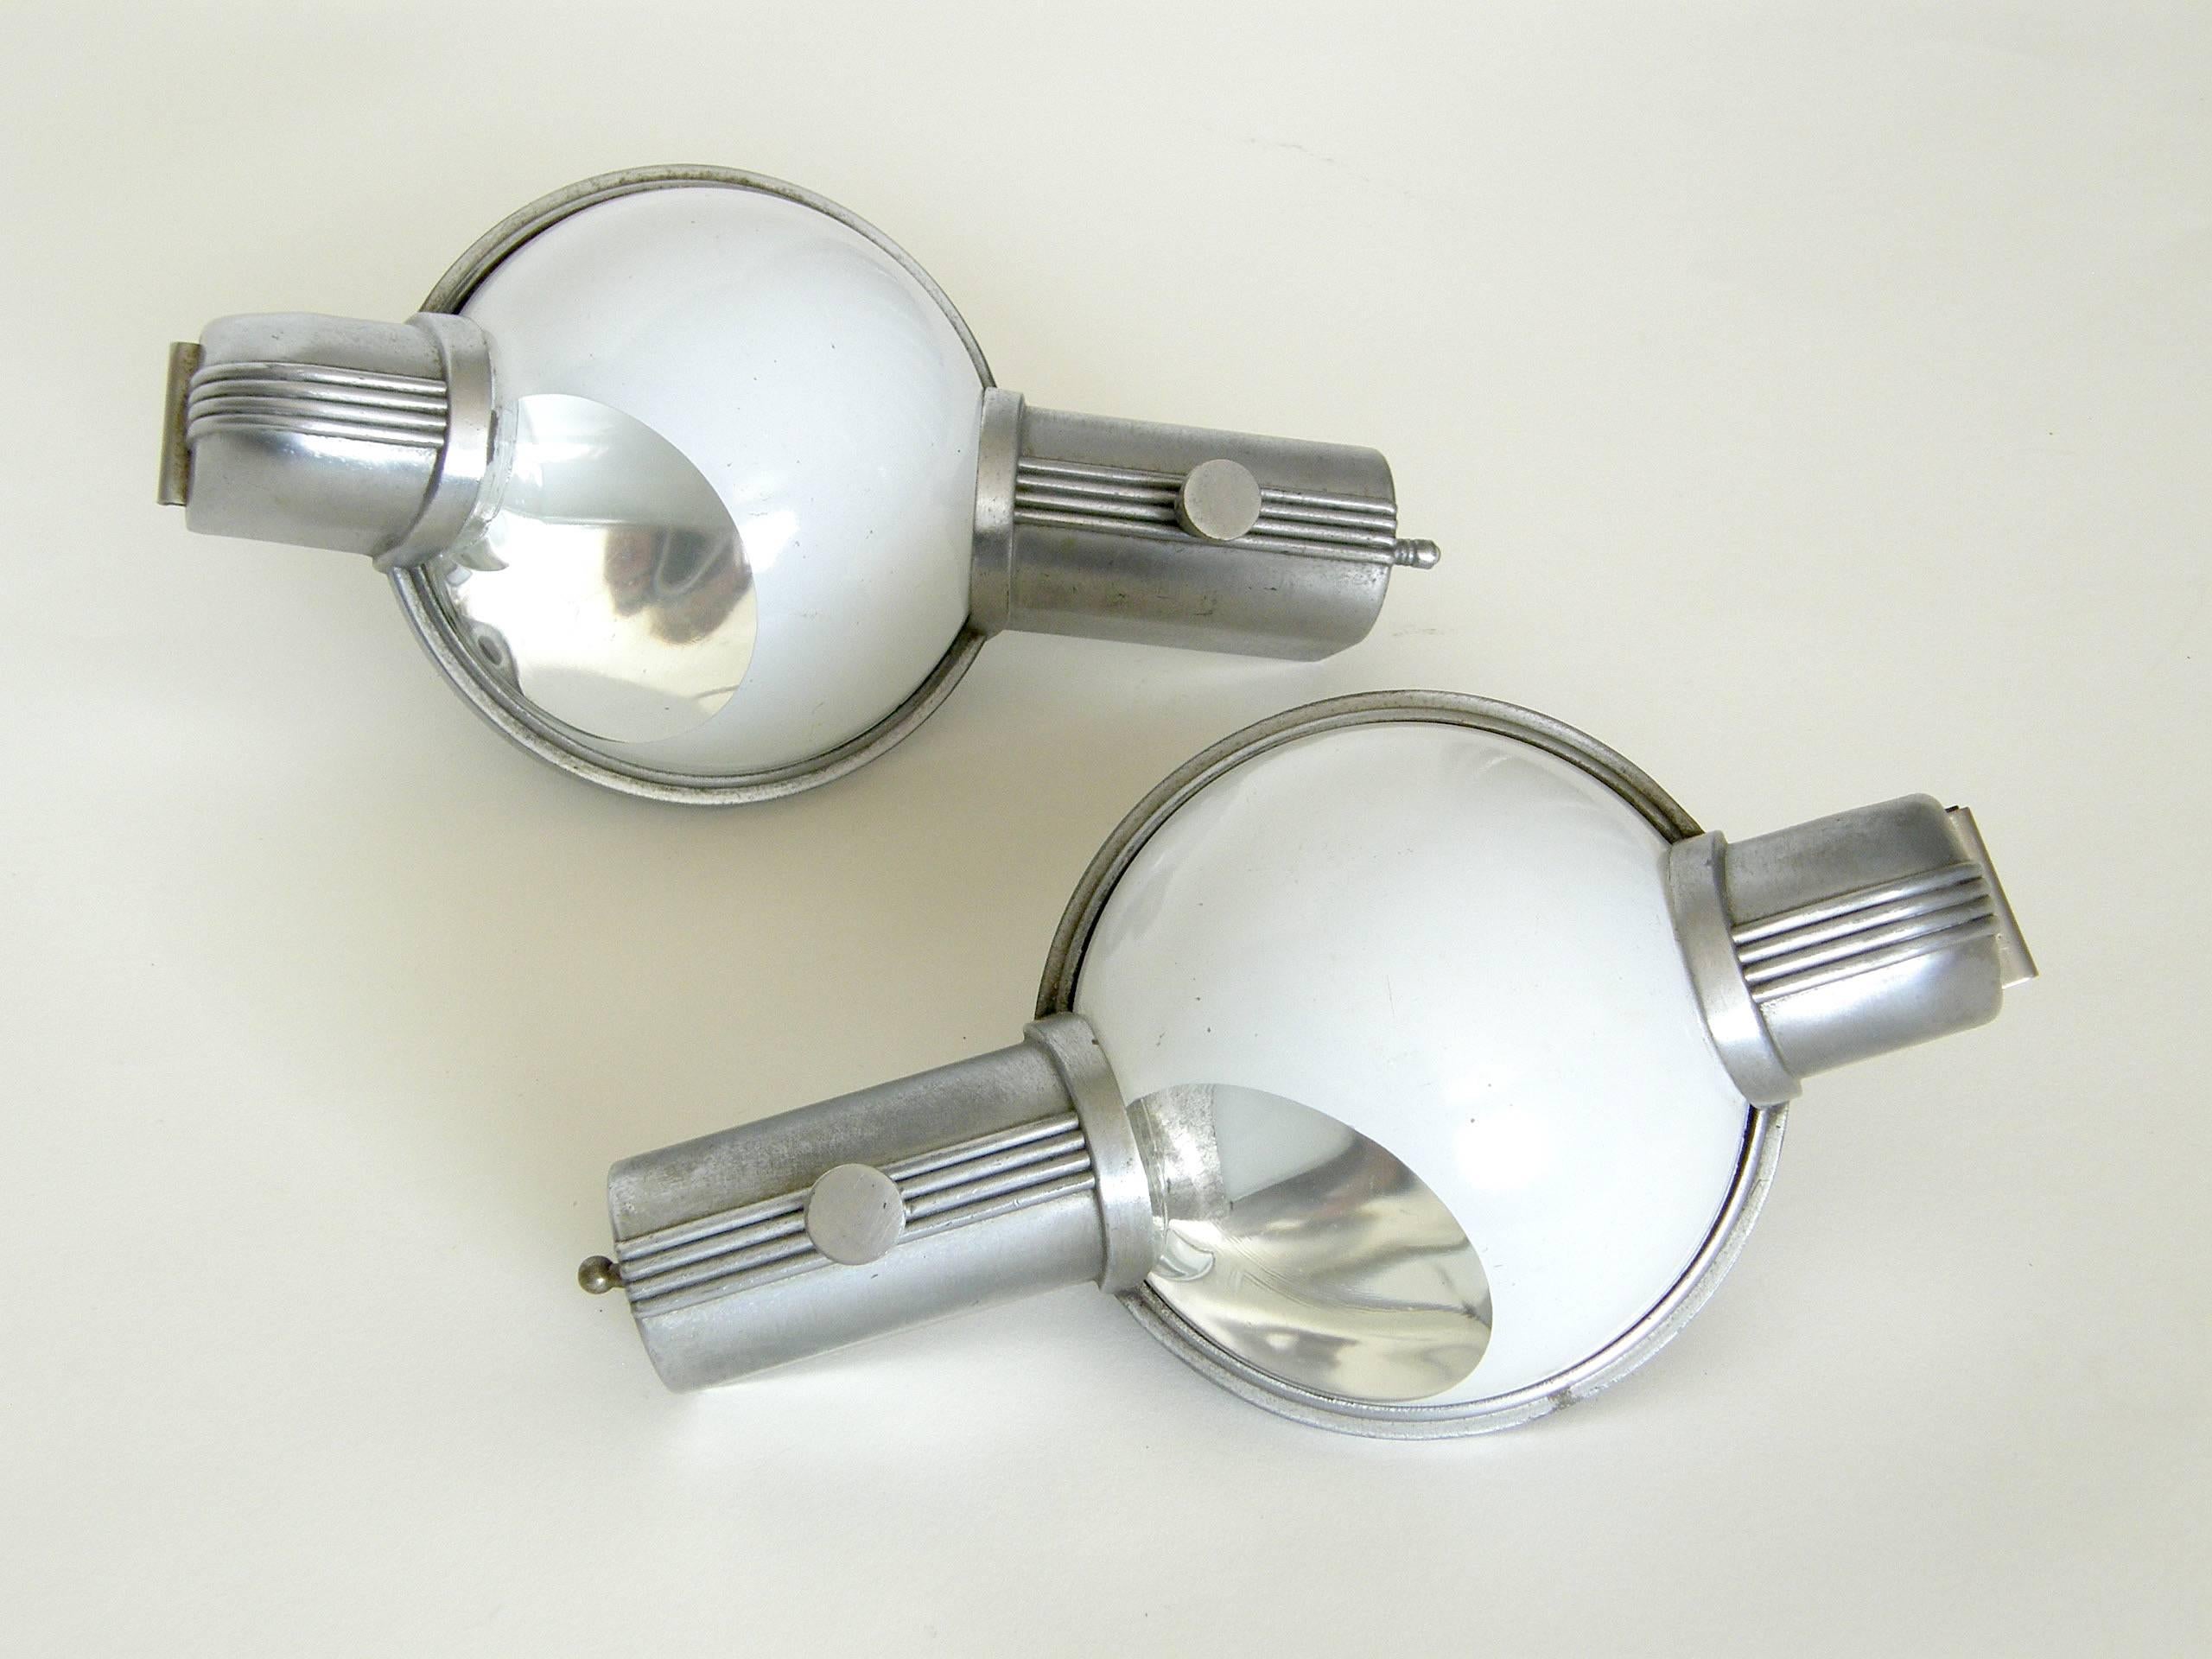 These streamlined, wall sconces were designed in 1938 by Henry Dreyfuss in conjunction with the Luminator Co. of Chicago. They were part of the original furnishings of the then newly redesigned, Art Deco style Pullman train cars of the 20th Century